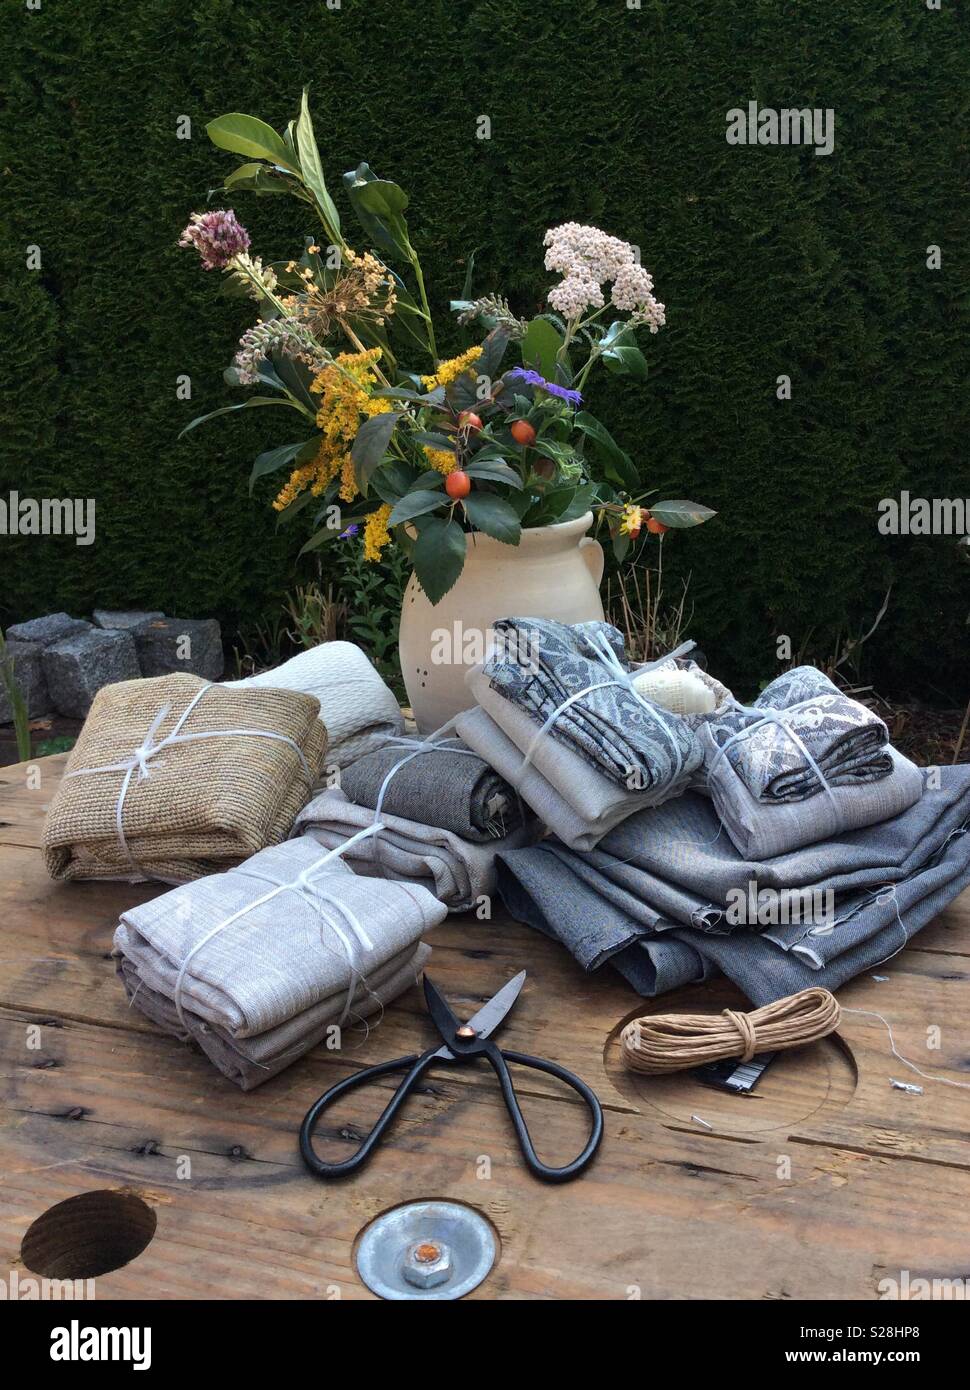 View on gift packages of vintage linen fabrics displayed on wooden cable roll in the garden Stock Photo